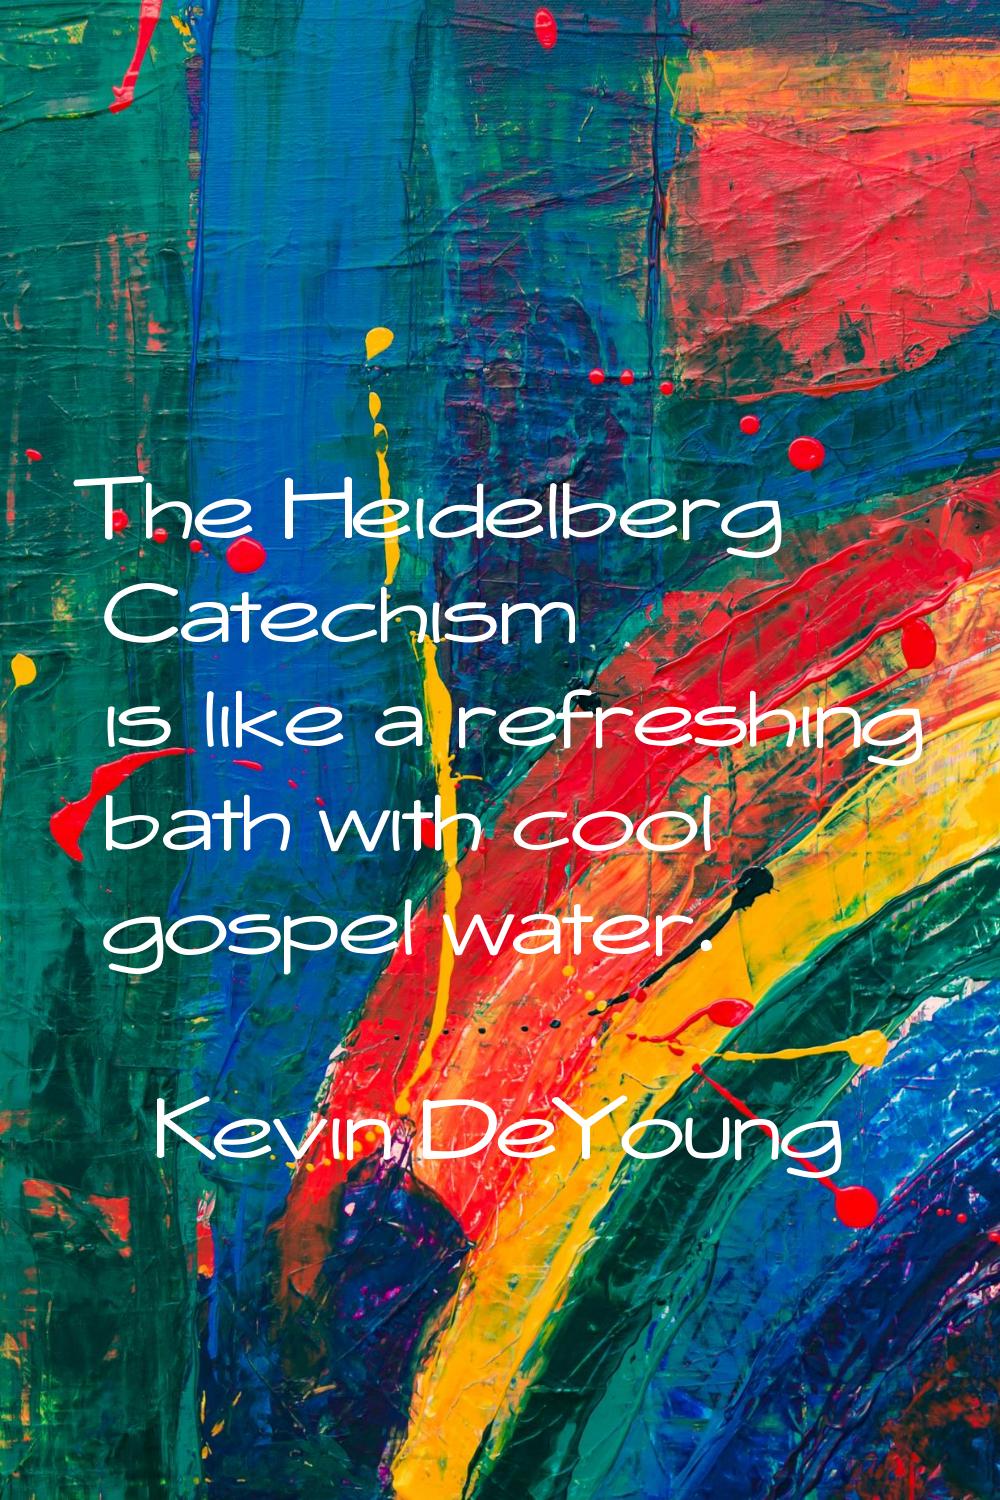 The Heidelberg Catechism is like a refreshing bath with cool gospel water.